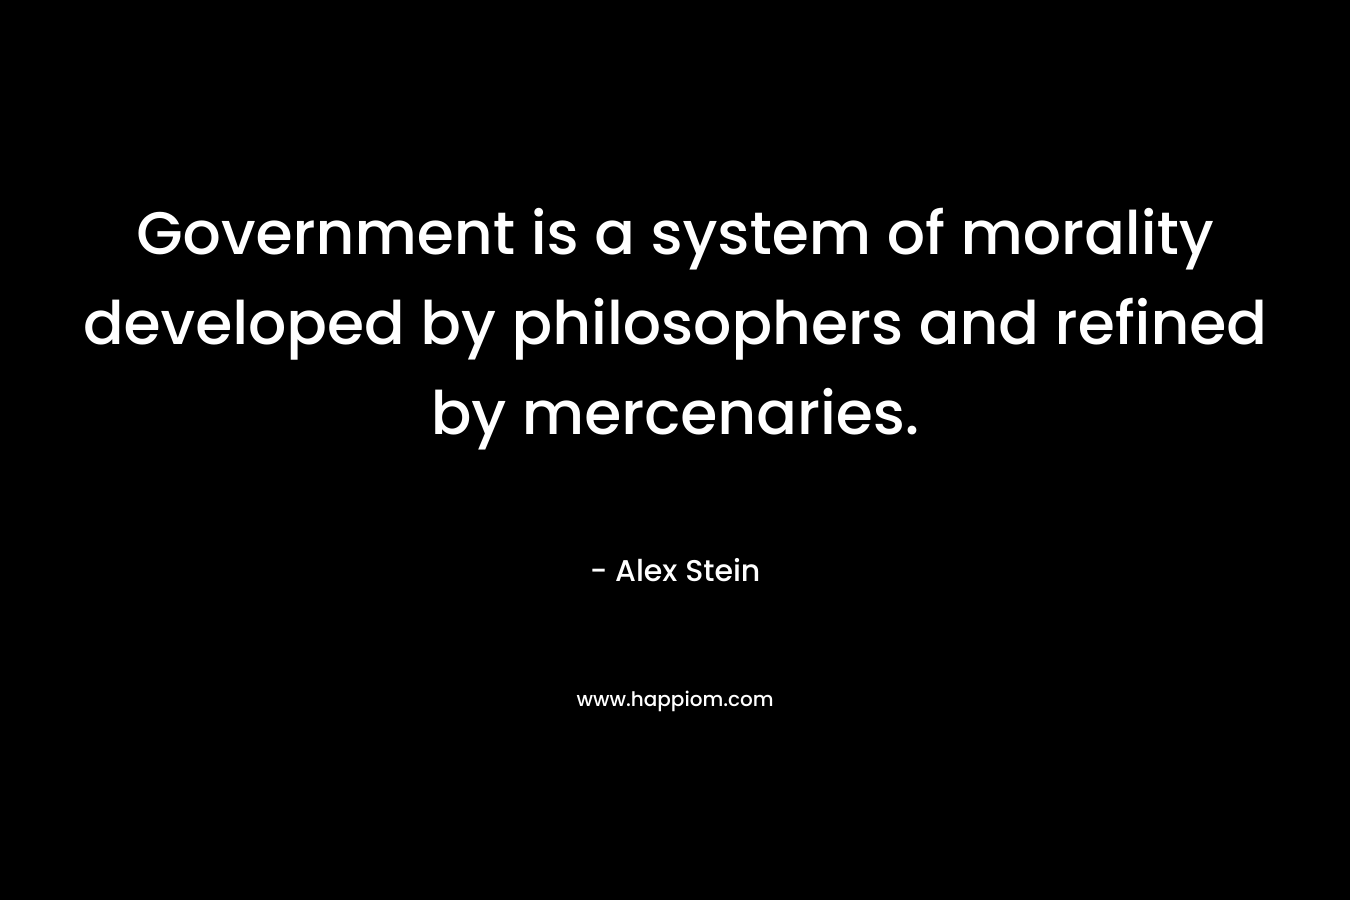 Government is a system of morality developed by philosophers and refined by mercenaries. – Alex Stein